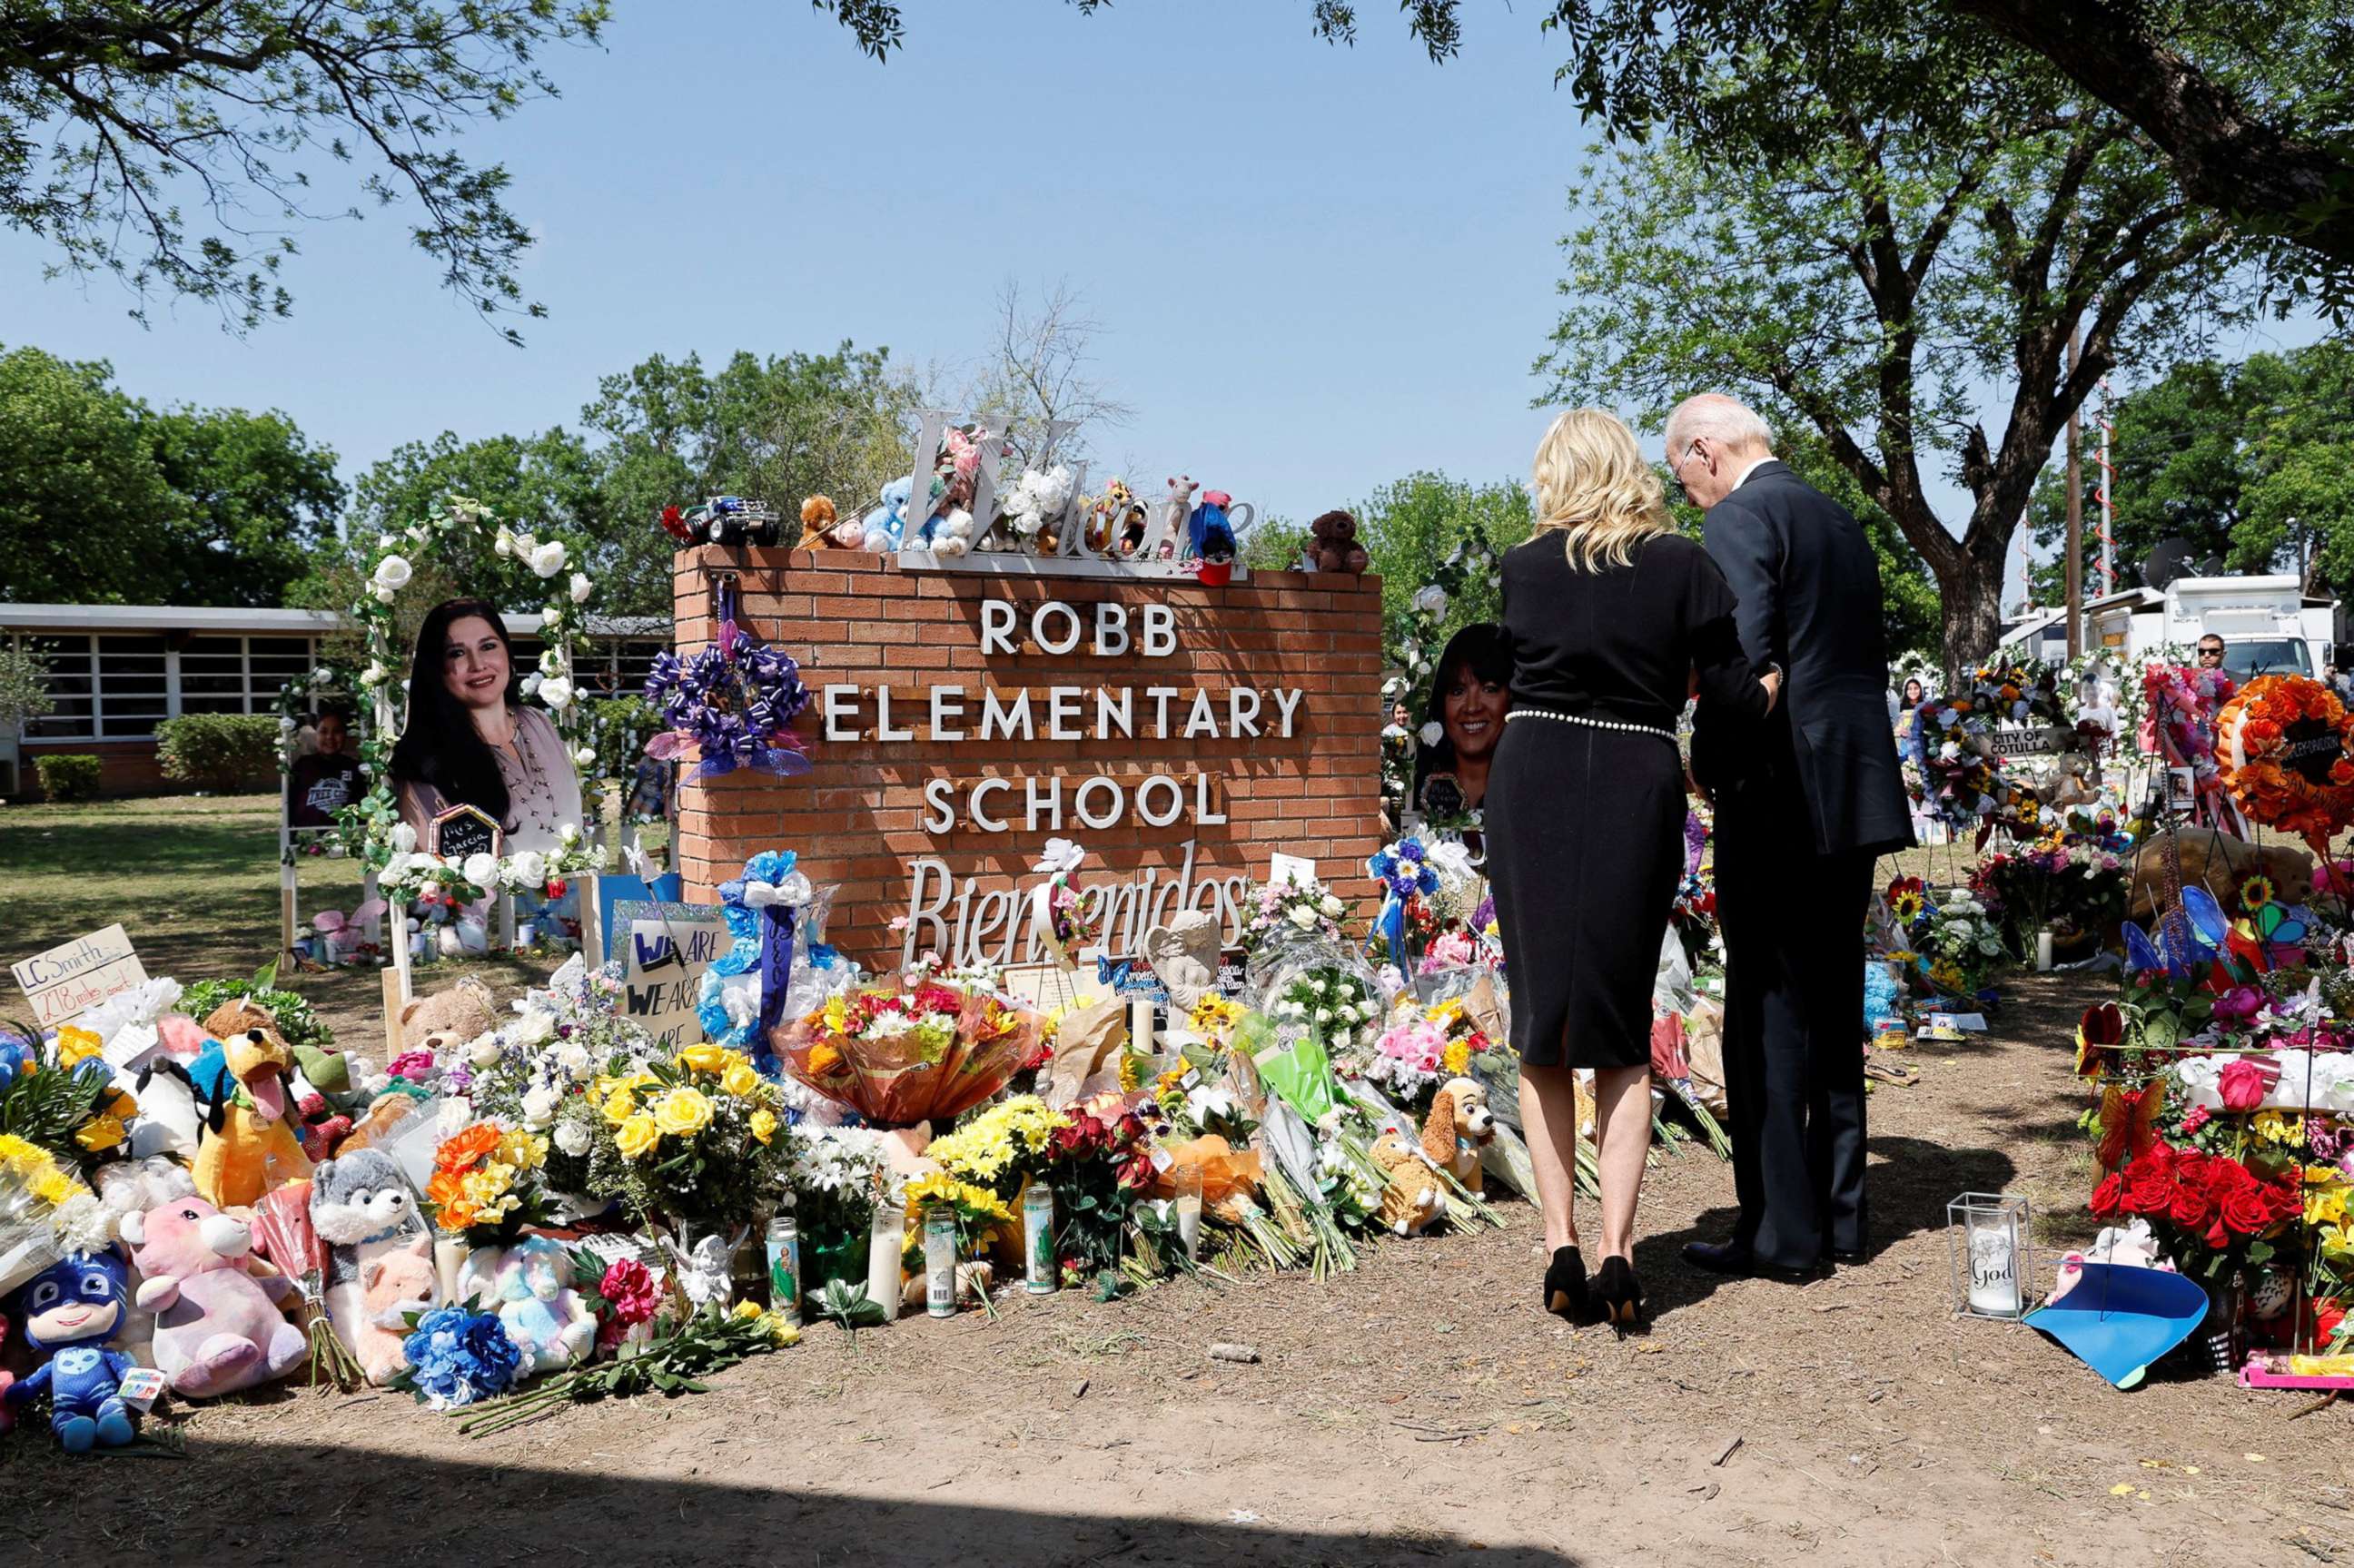 PHOTO: President Joe Biden and first lady Jill Biden pay their respects at the Robb Elementary School memorial, where a gunman killed 19 children and two teachers in the deadliest U.S. school shooting in nearly a decade, in Uvalde, Texas, May 29, 2022.